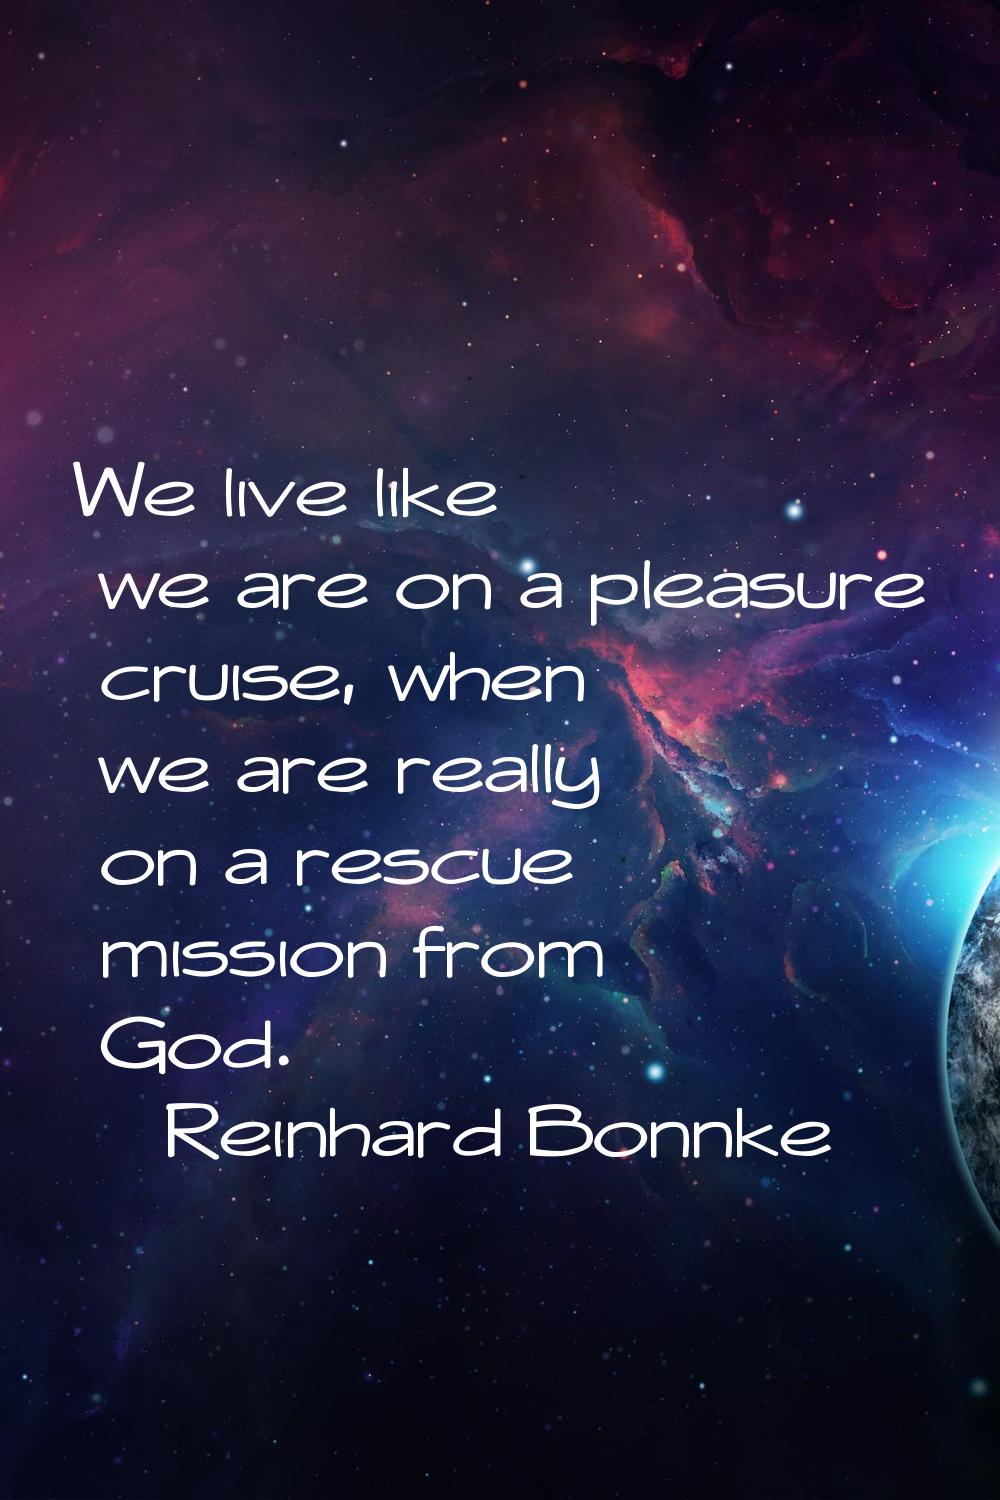 We live like we are on a pleasure cruise, when we are really on a rescue mission from God.